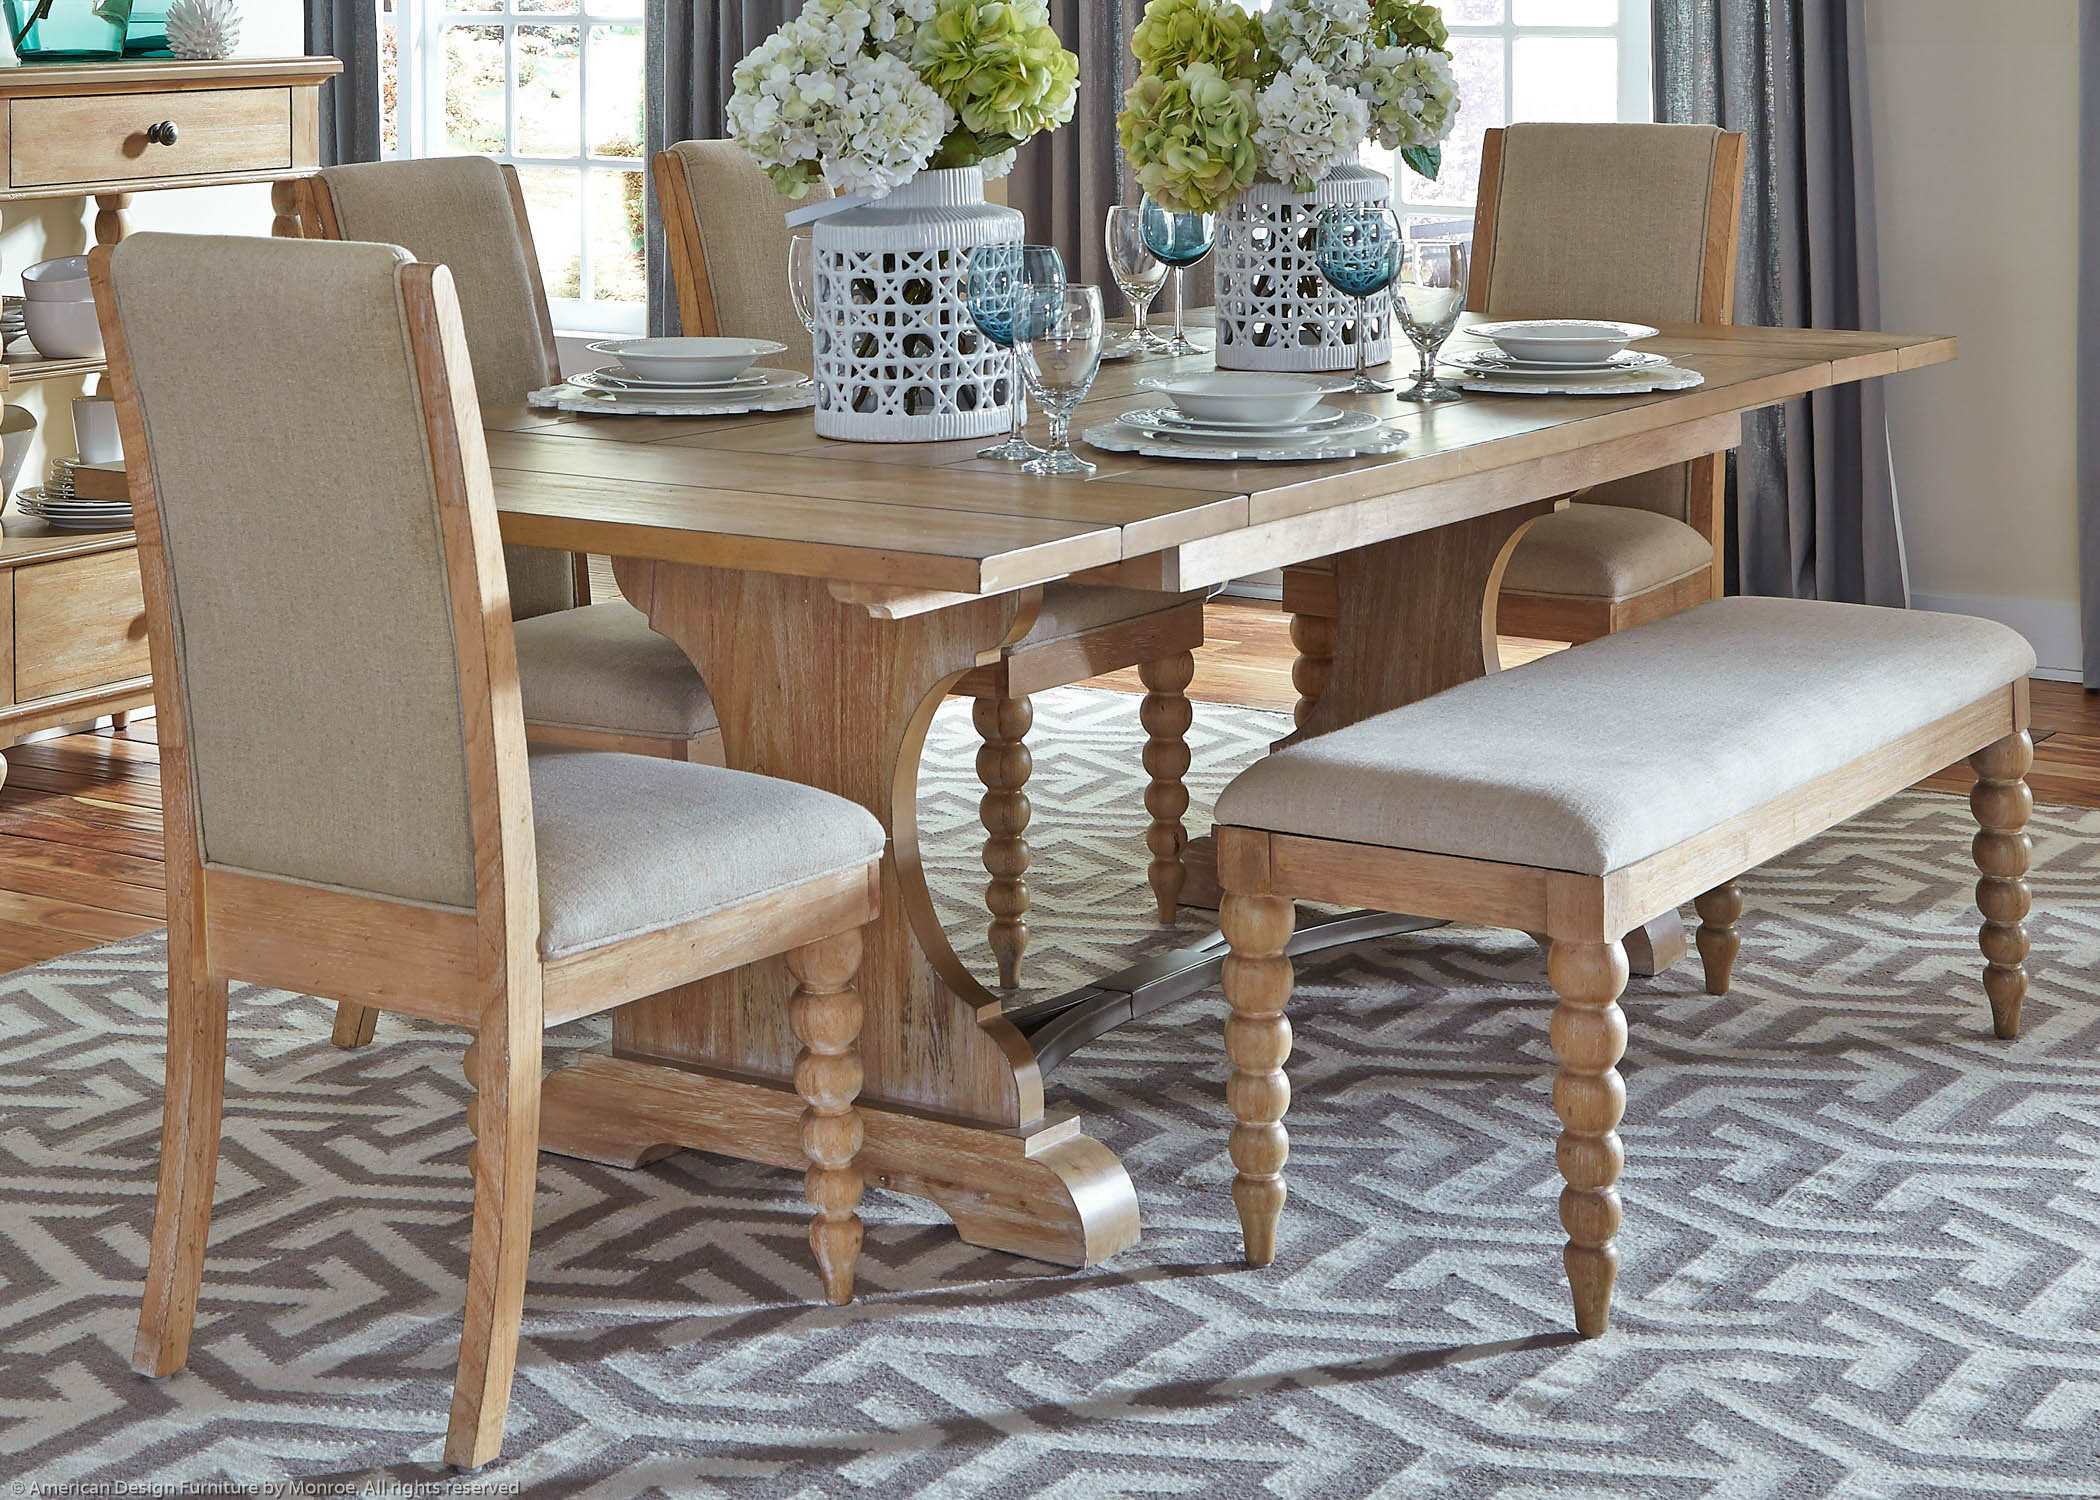 Chesapeake Casual Table Pic 2 (Heading Trestle Table)